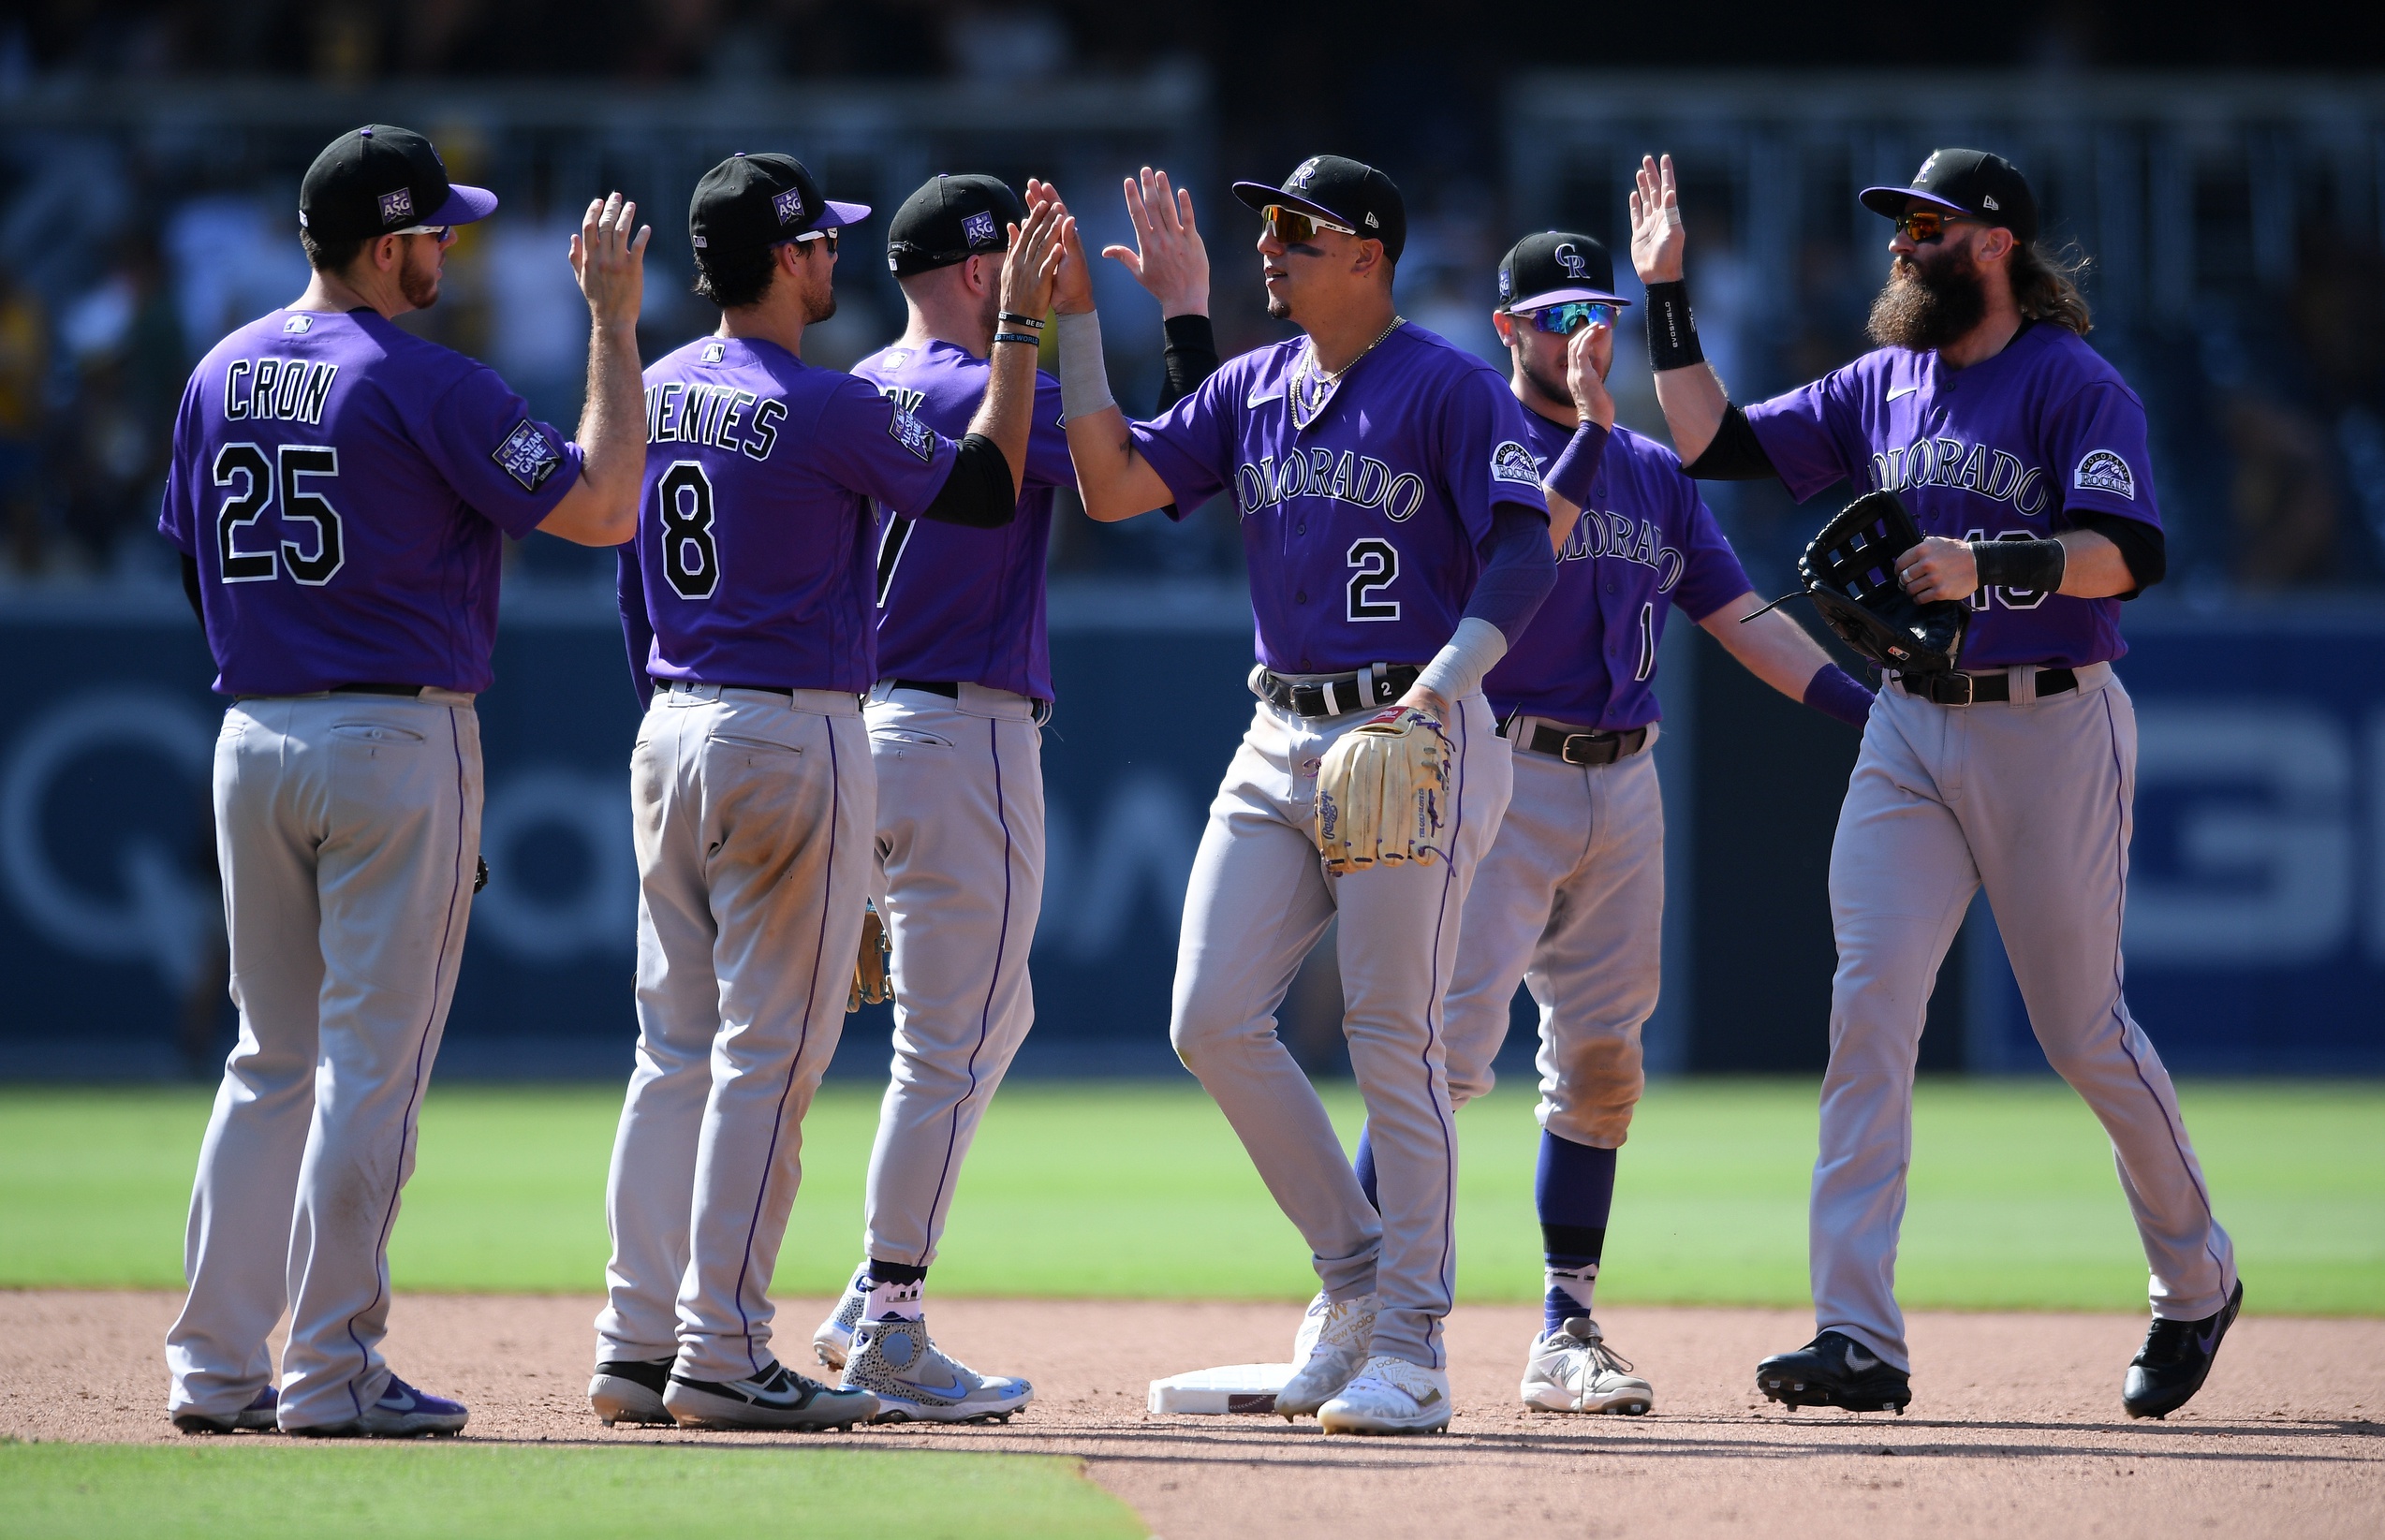 MLB: Do you know just how bad the Colorado Rockies have been?